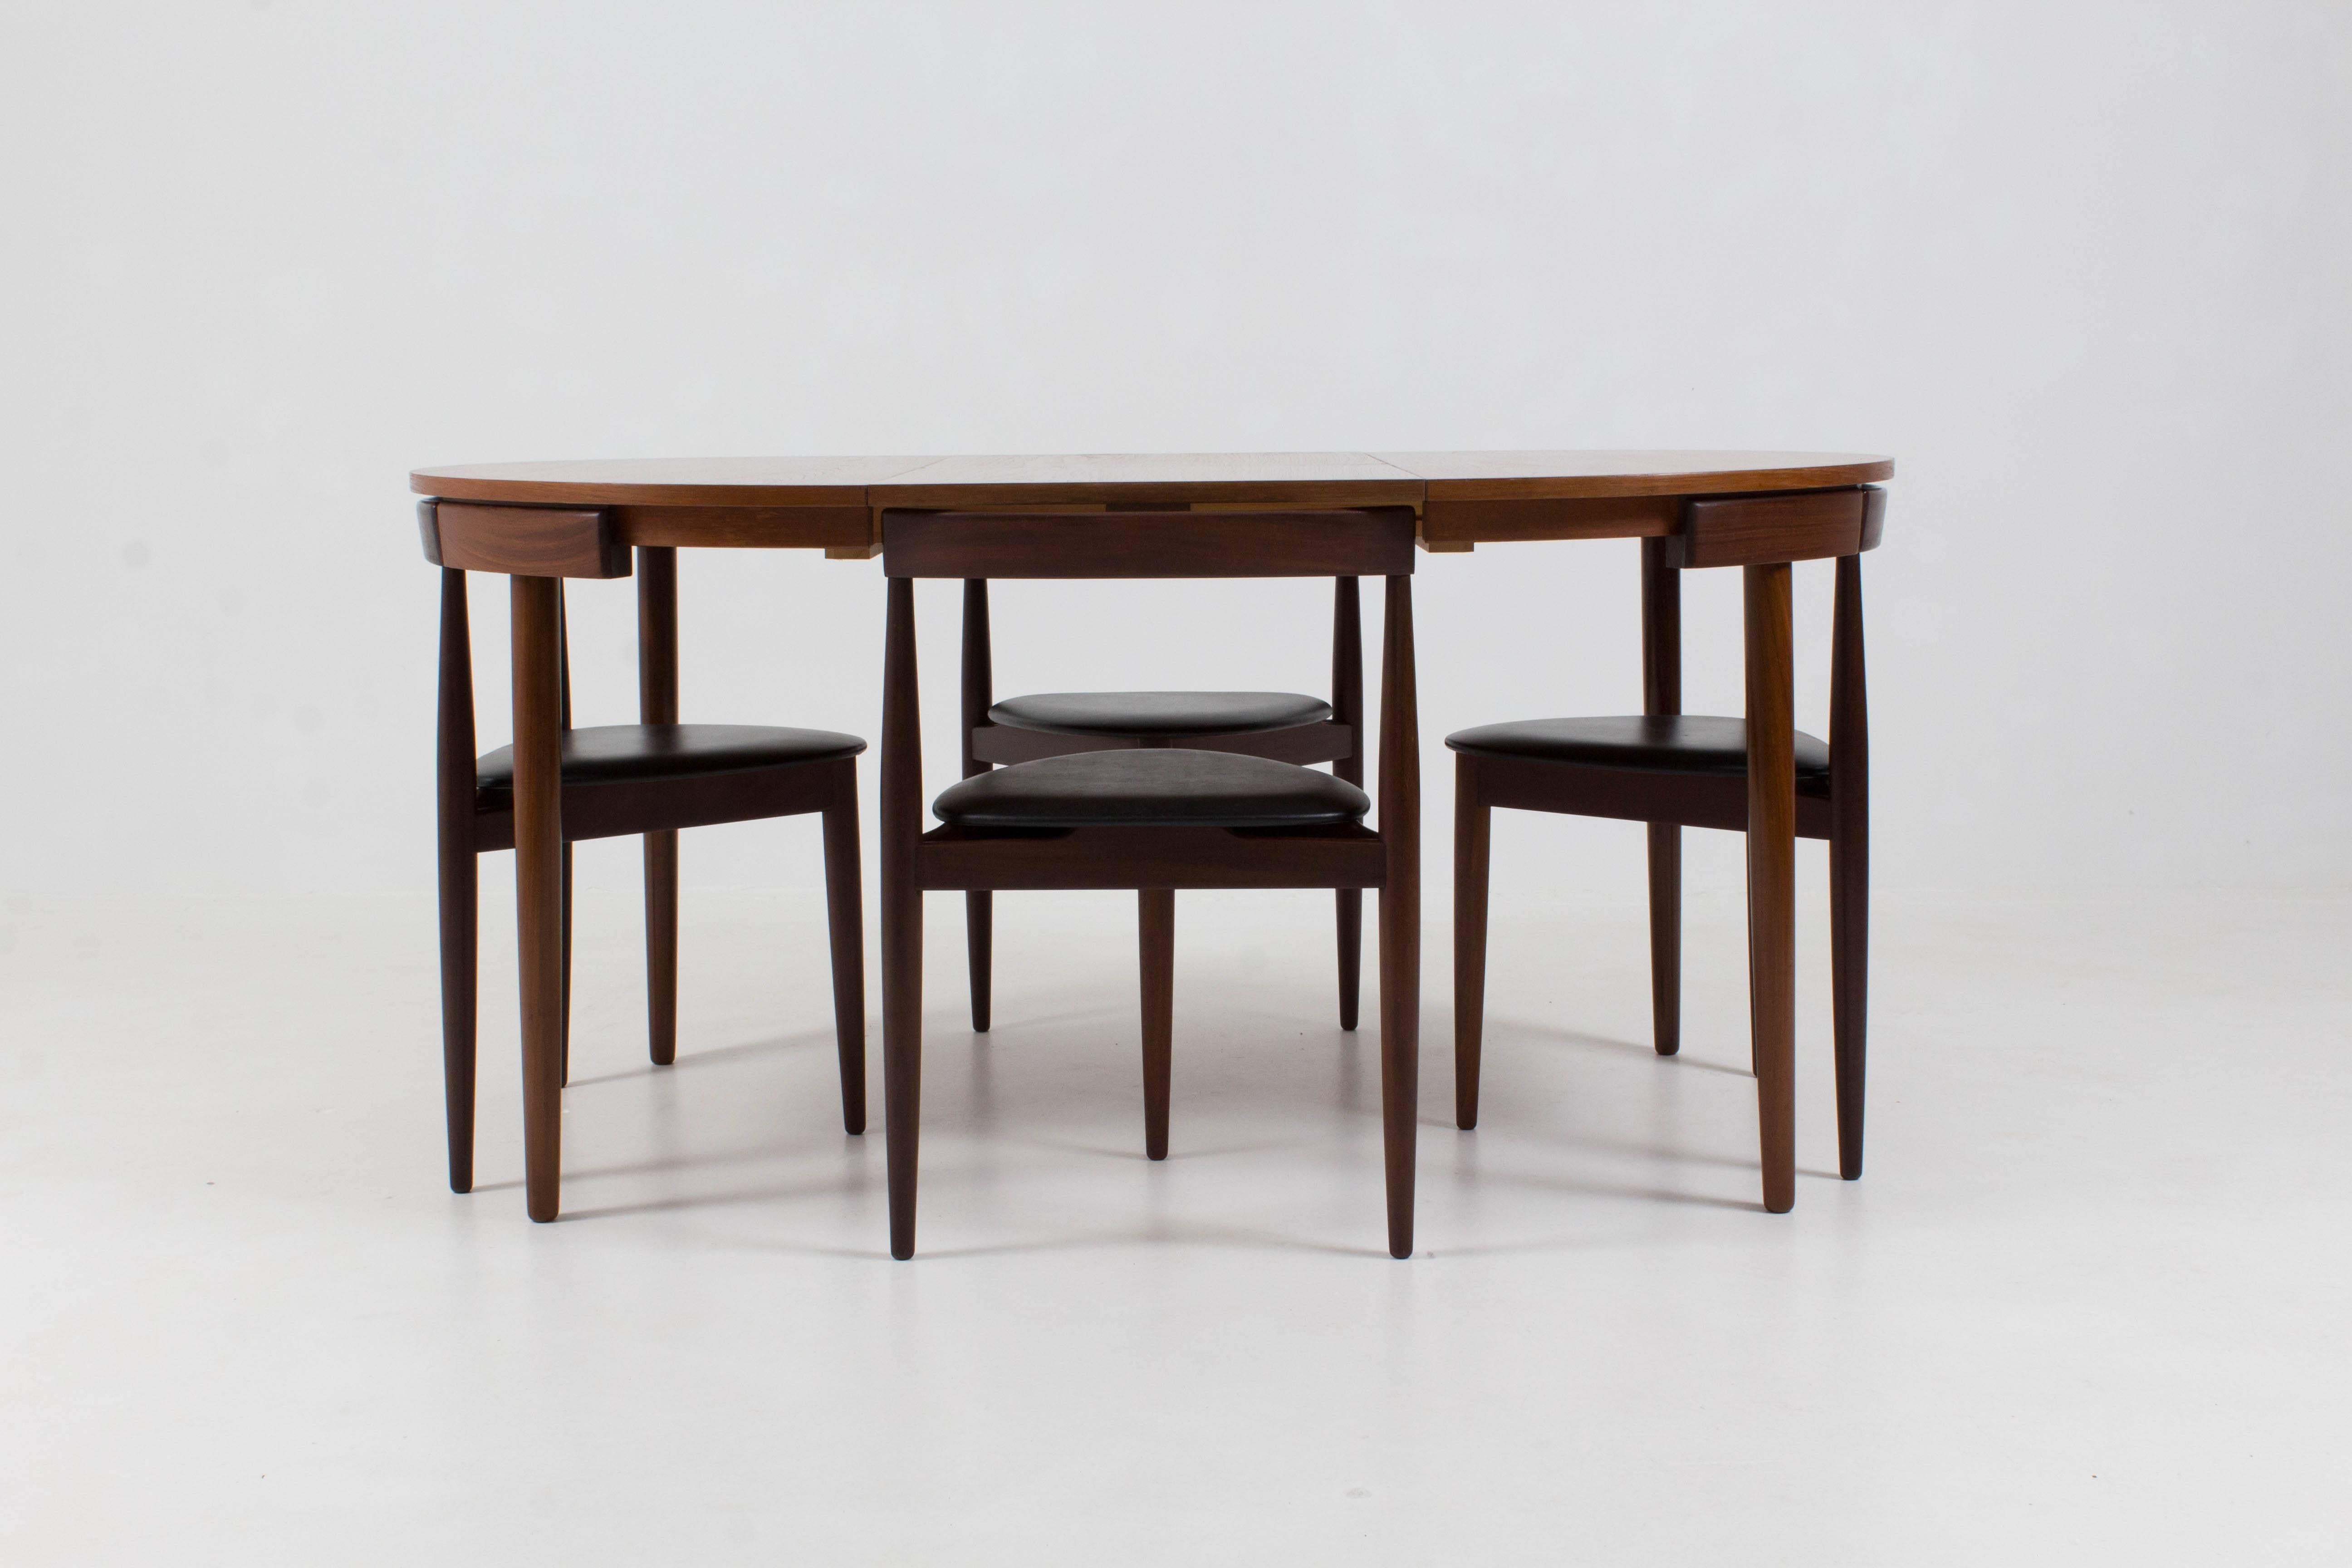 Iconic Danish design, note how the back of the chair cleverly fits into the edge
of the extendable table.Both an elegant and space-saving solution.
Marked with Danish Control label and brand mark,see images.
In good original condition with minor